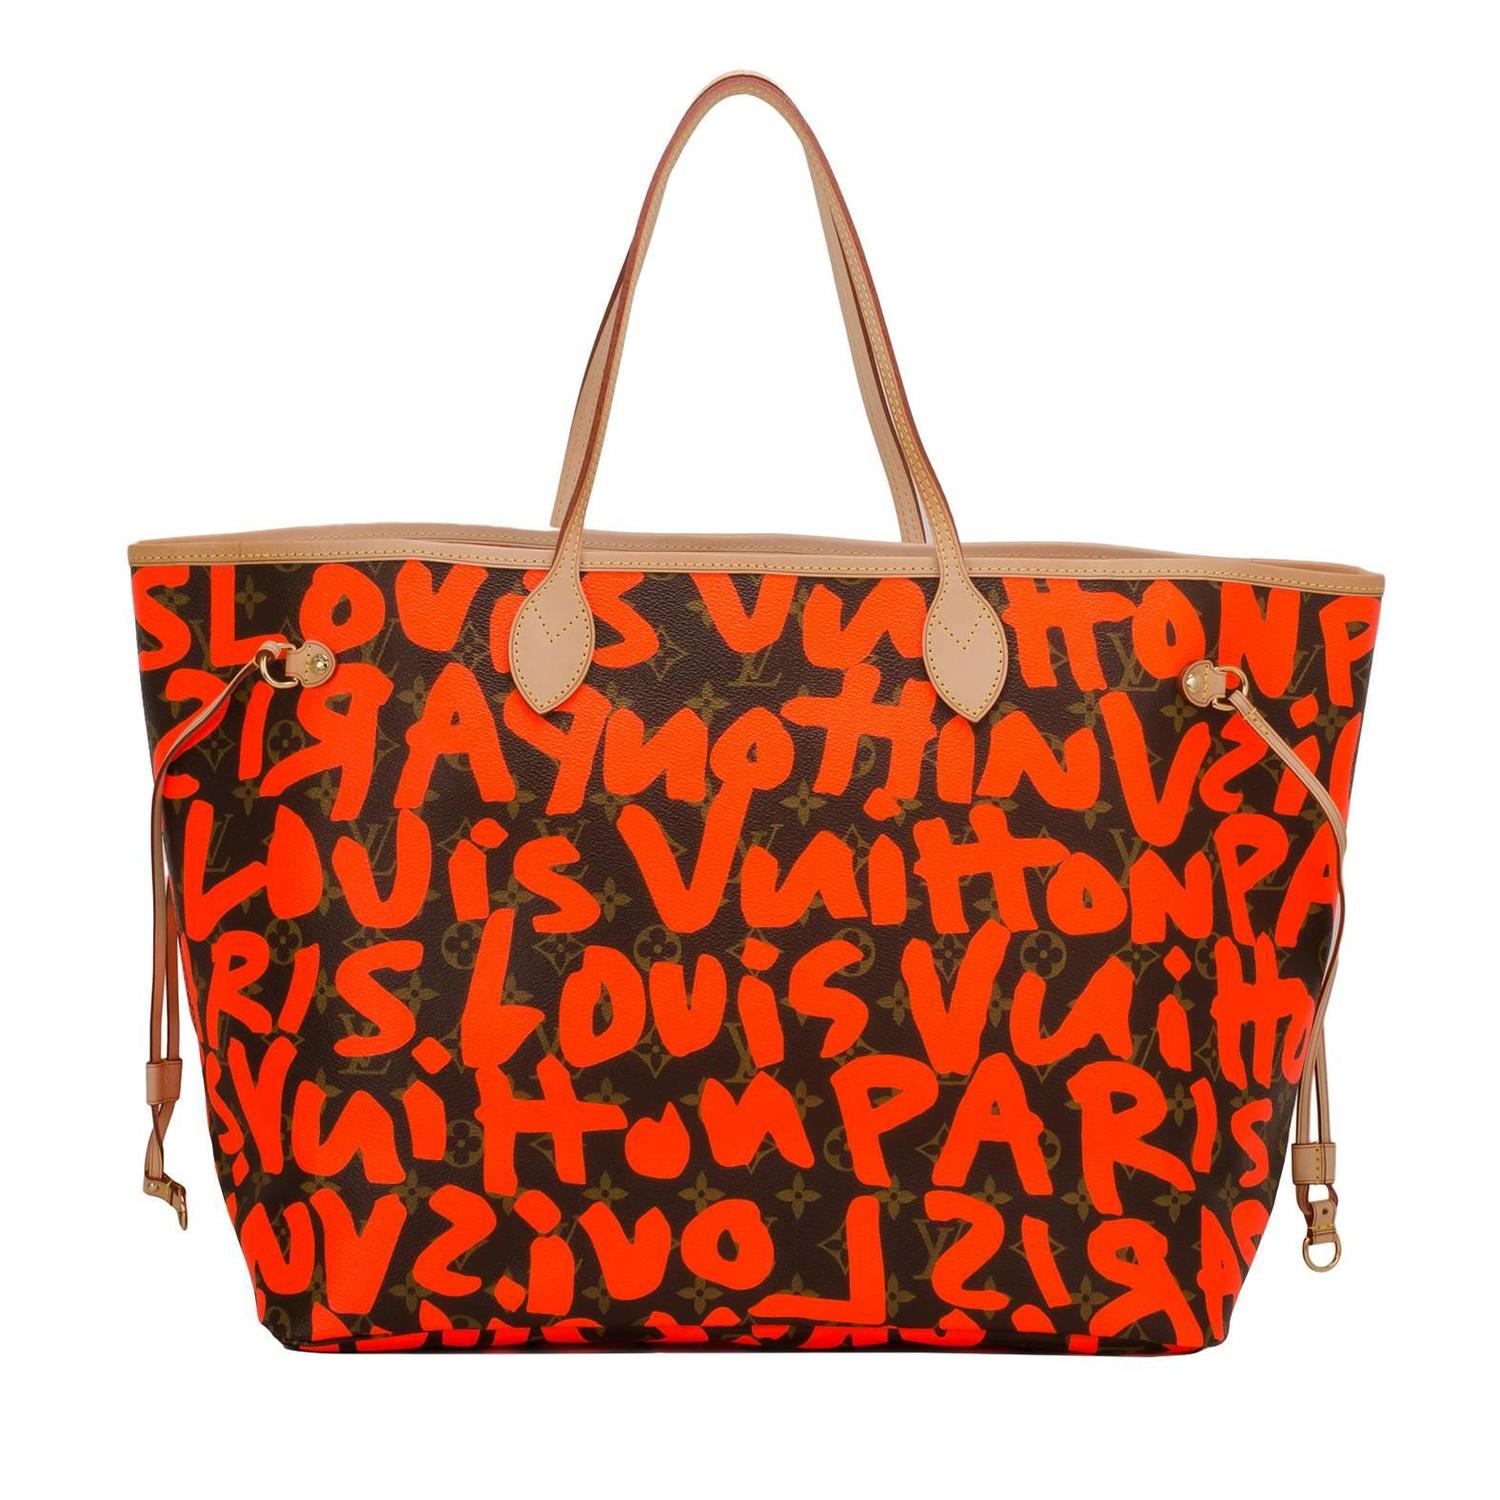 Sac Louis Vuitton Orange | Confederated Tribes of the Umatilla Indian Reservation